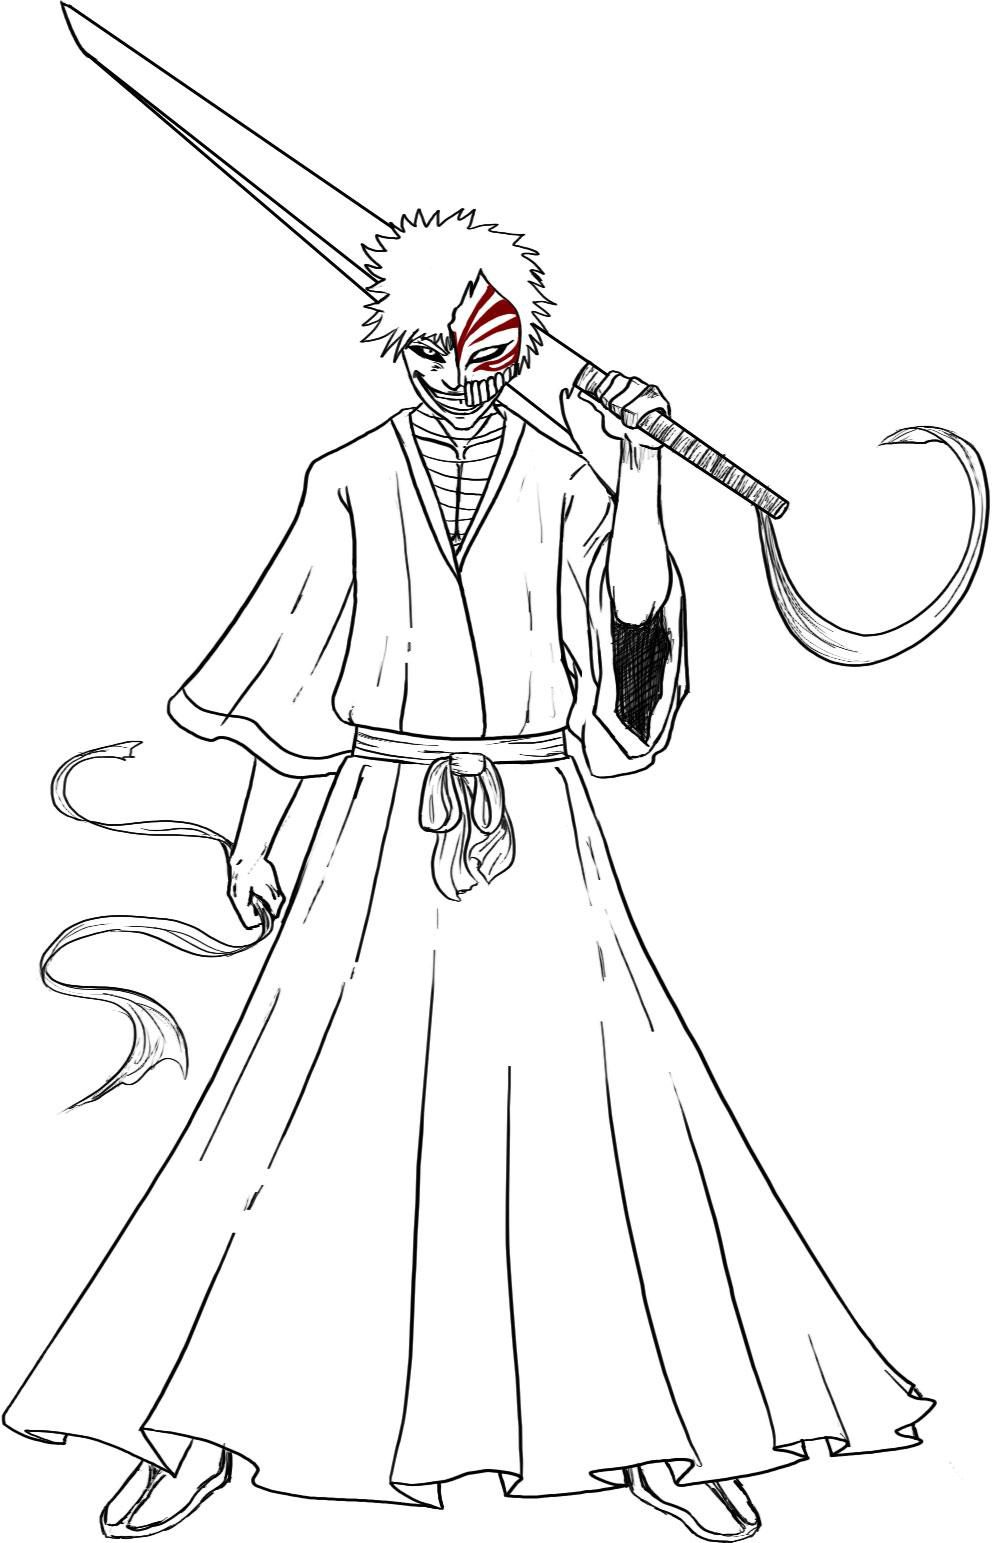 Bleach Coloring Picture 5